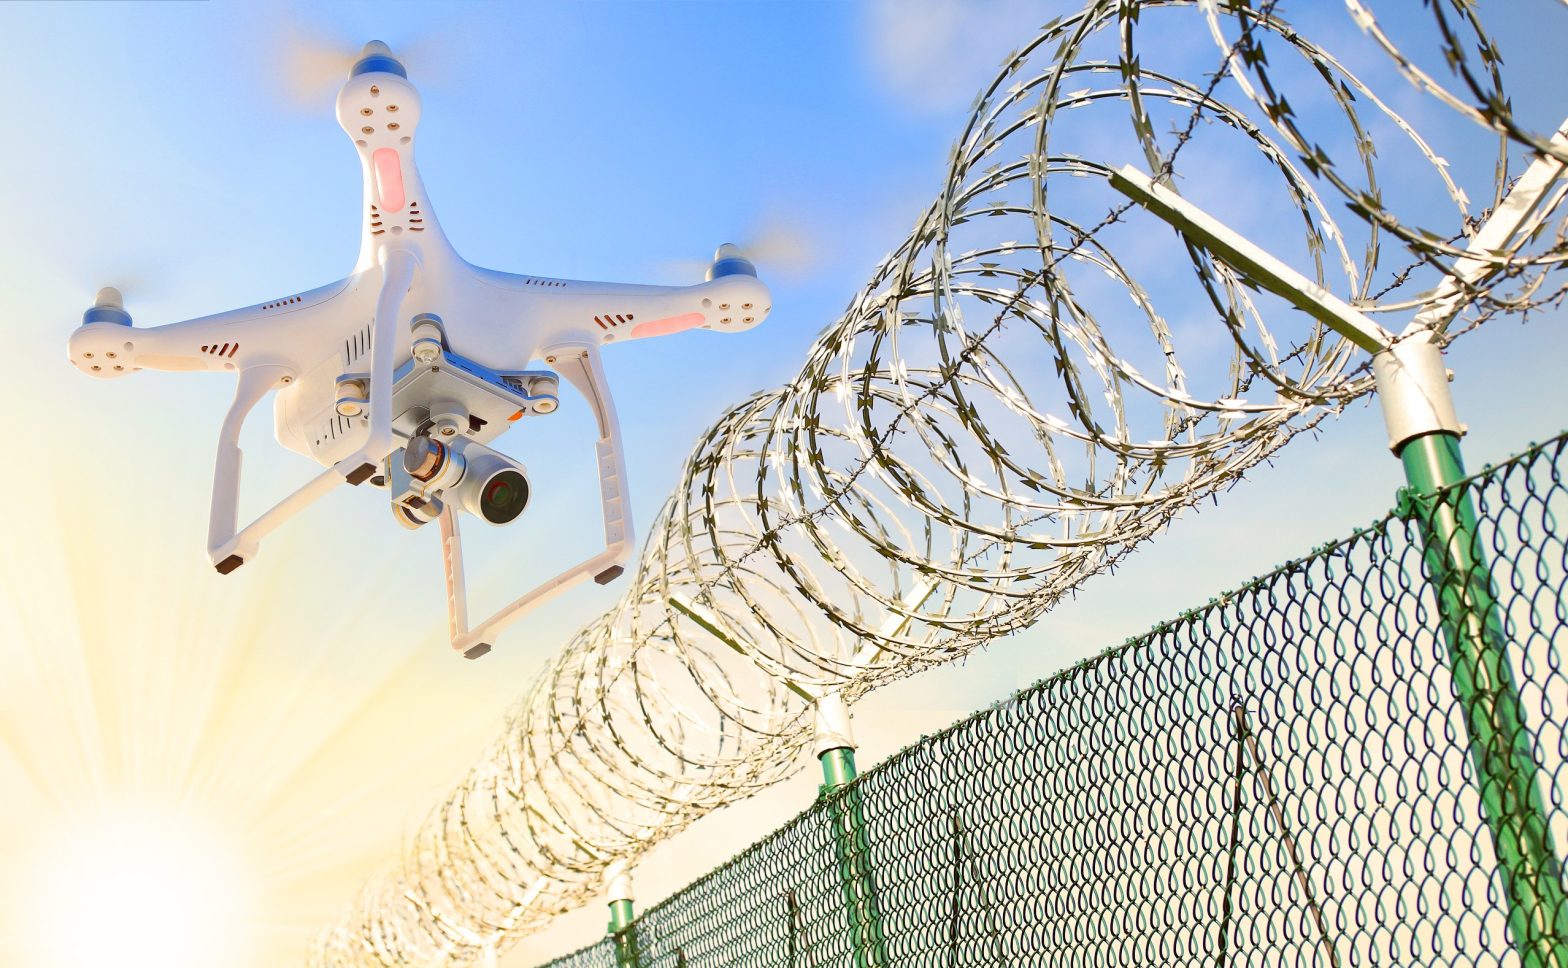 Drone over a barbed wire fence. News - Washington State Prison - Hikal Abdulrahman